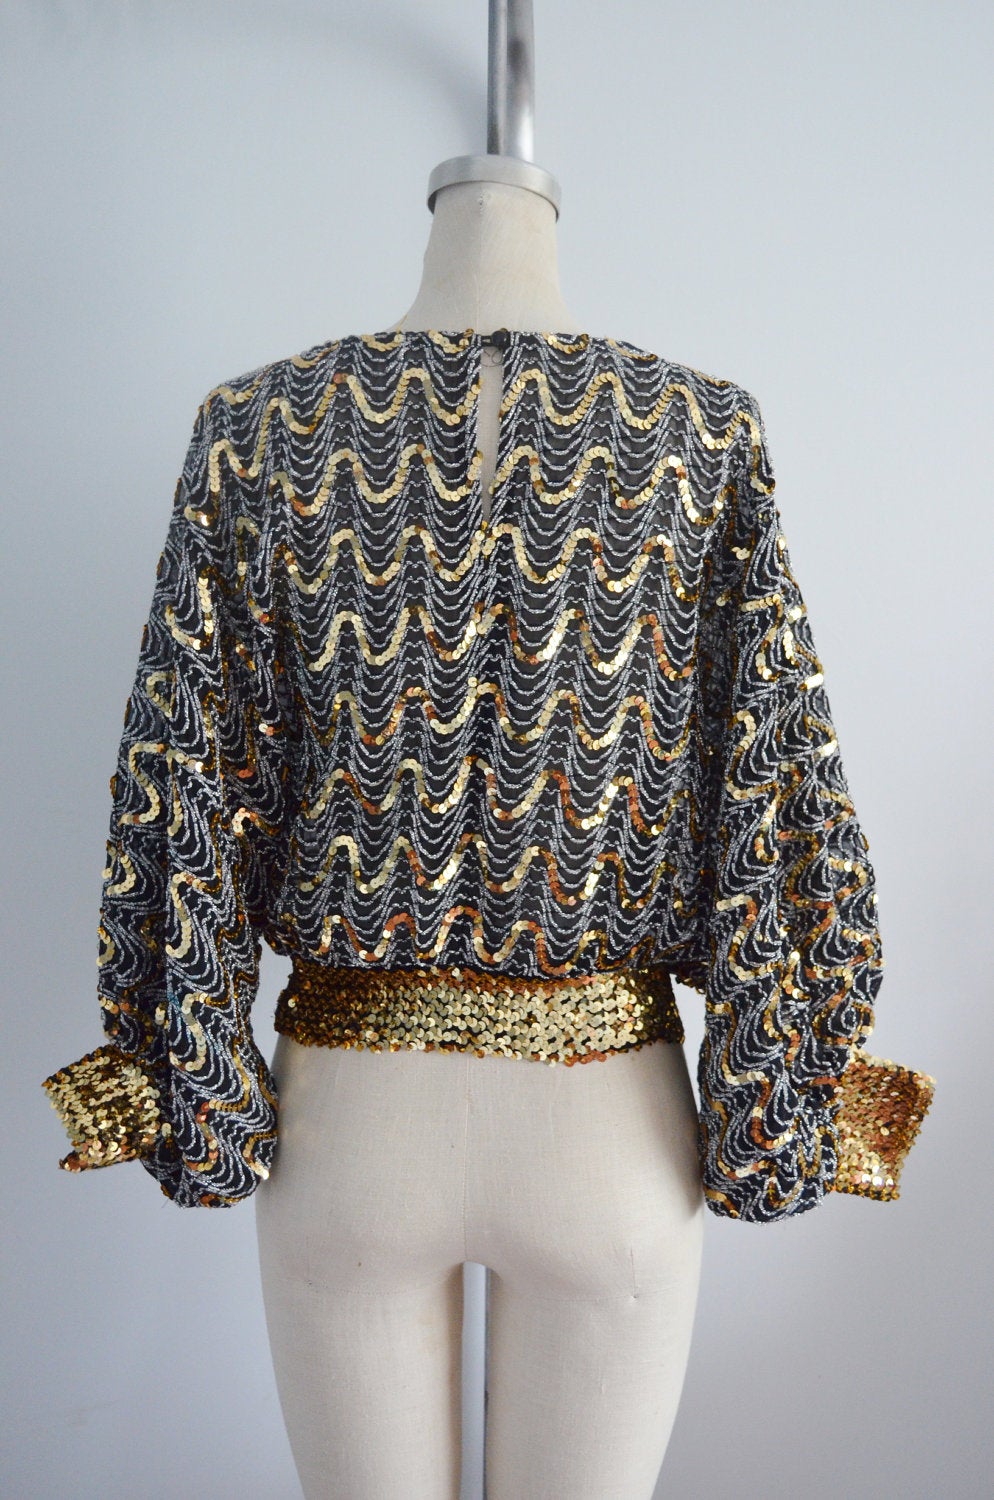 70S Glam Sequined And Beaded Batwing Disco Top Blouse Metallic Black & Gold